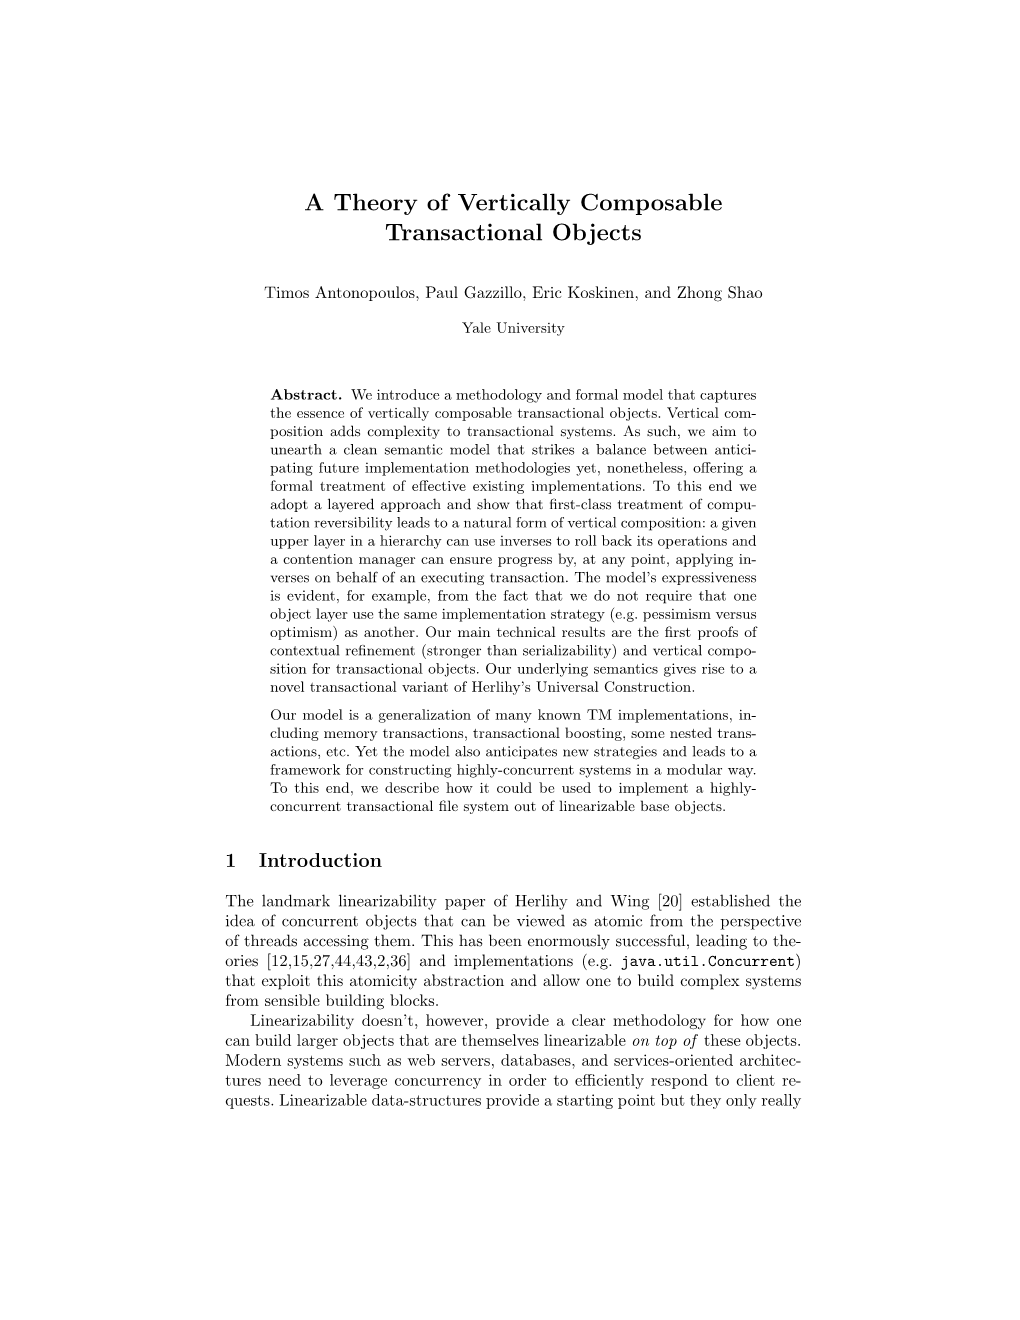 A Theory of Vertically Composable Transactional Objects